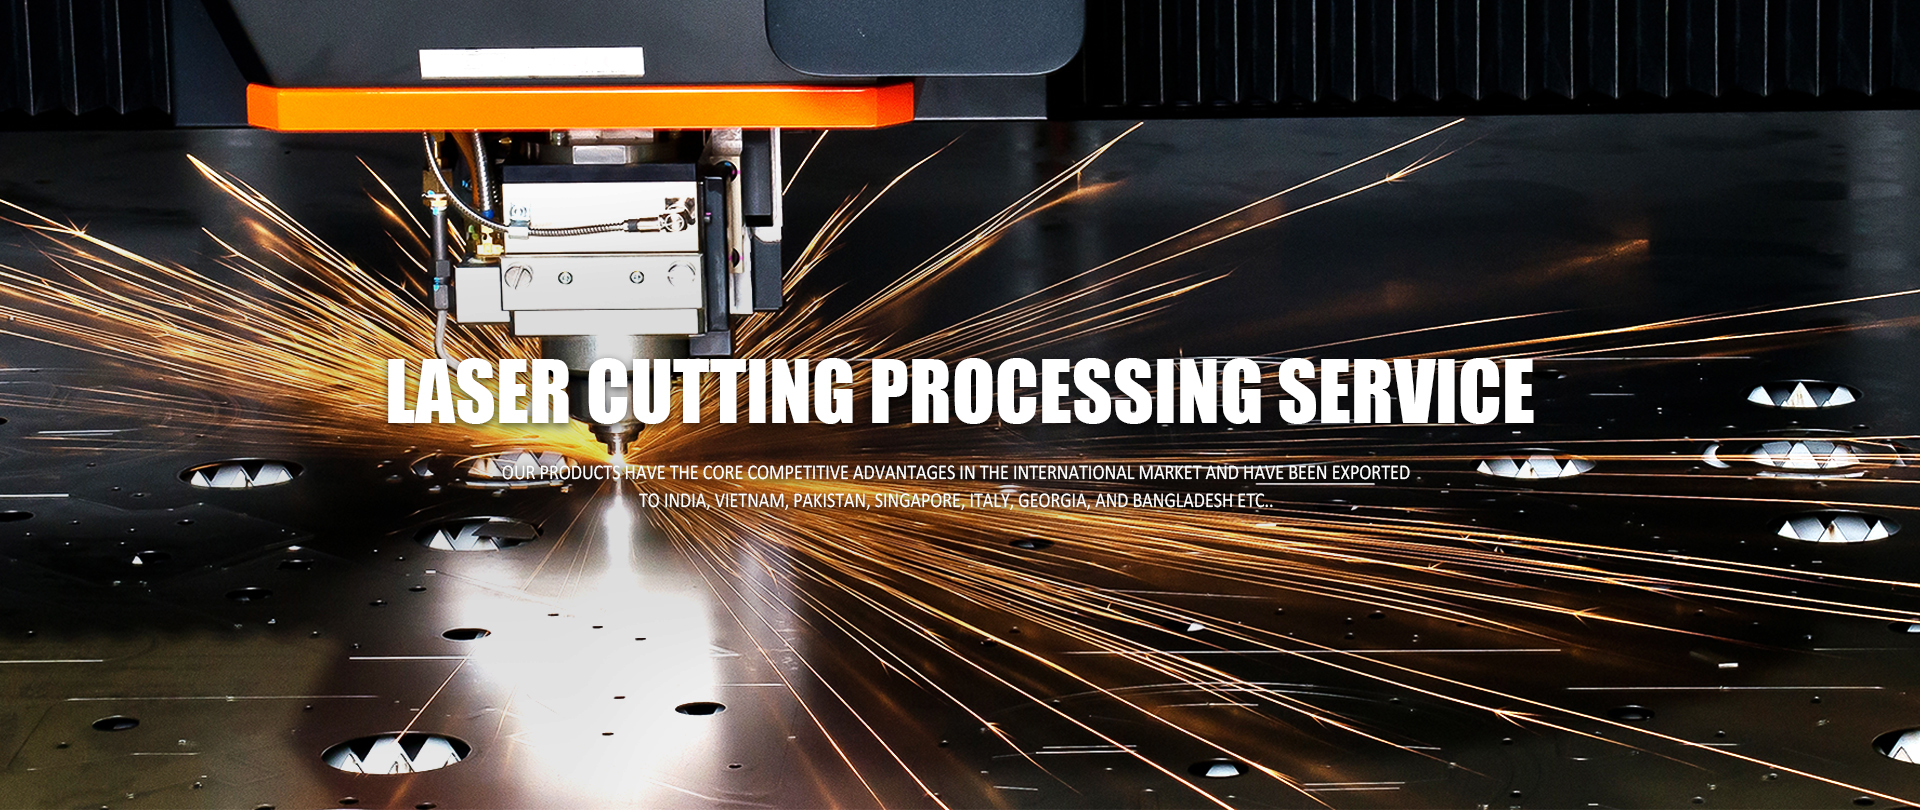 AHL STEEL laser cutting Processing Service